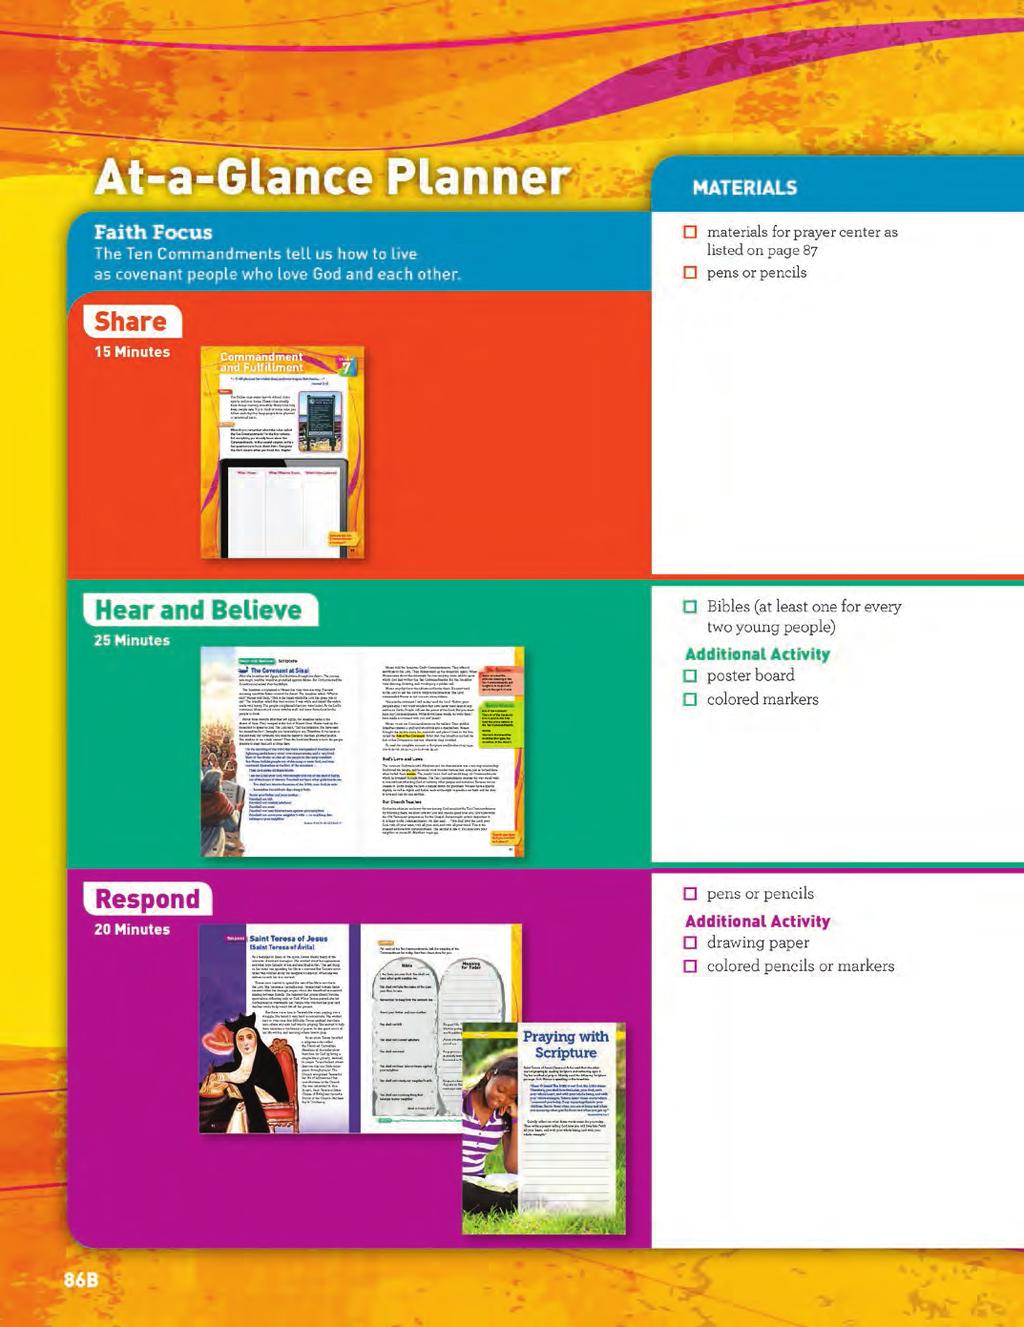 Grade 6 Catechist Guide At-a-Glance Planner AT-A-GLANCE PLANNER The At-a-Glance Planner presents an overview of the